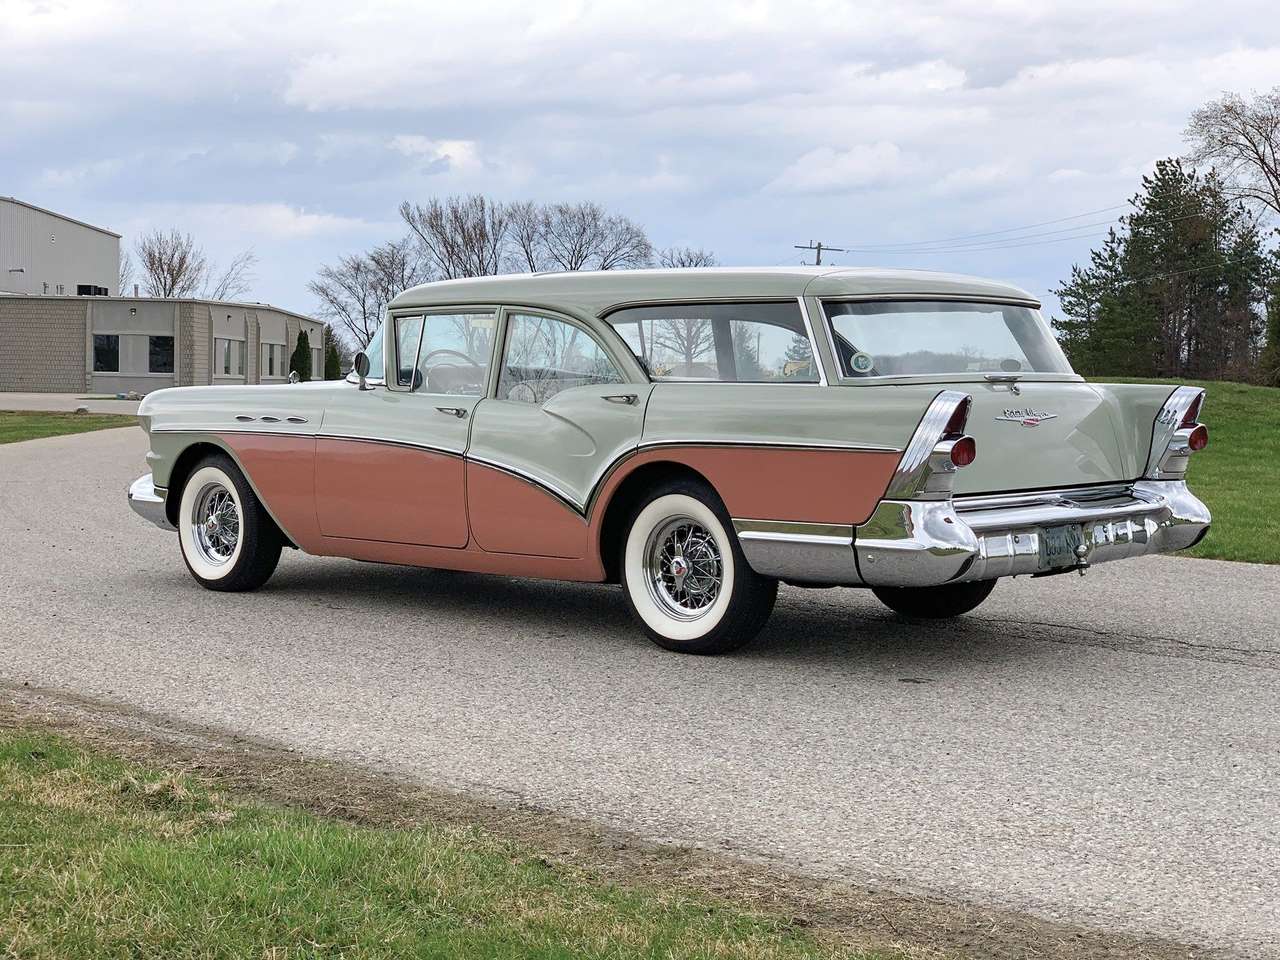 1957 Buick Special Wagon puzzle online